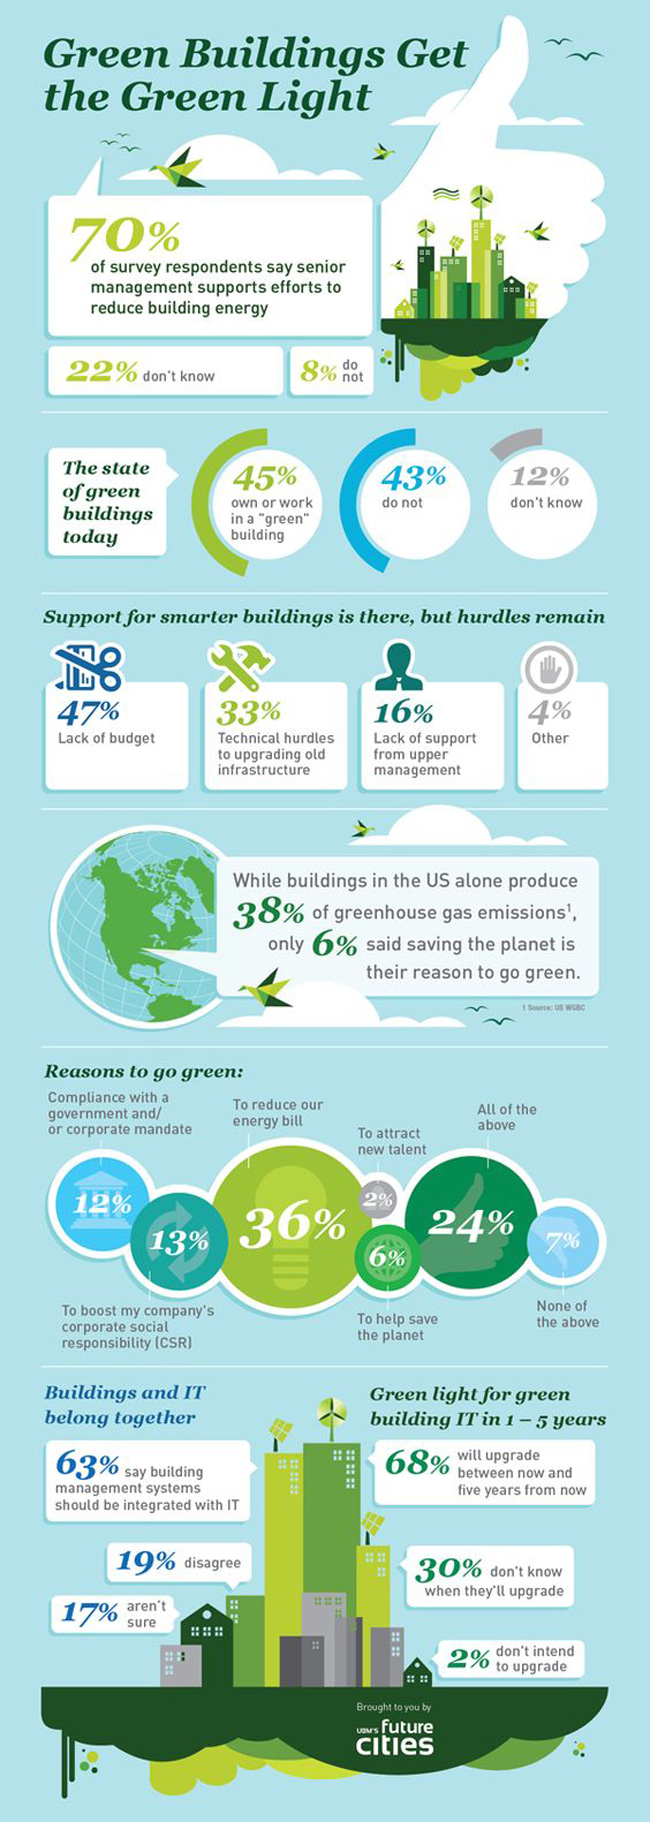 Share the Green-Schools Infographic  Green-Schools